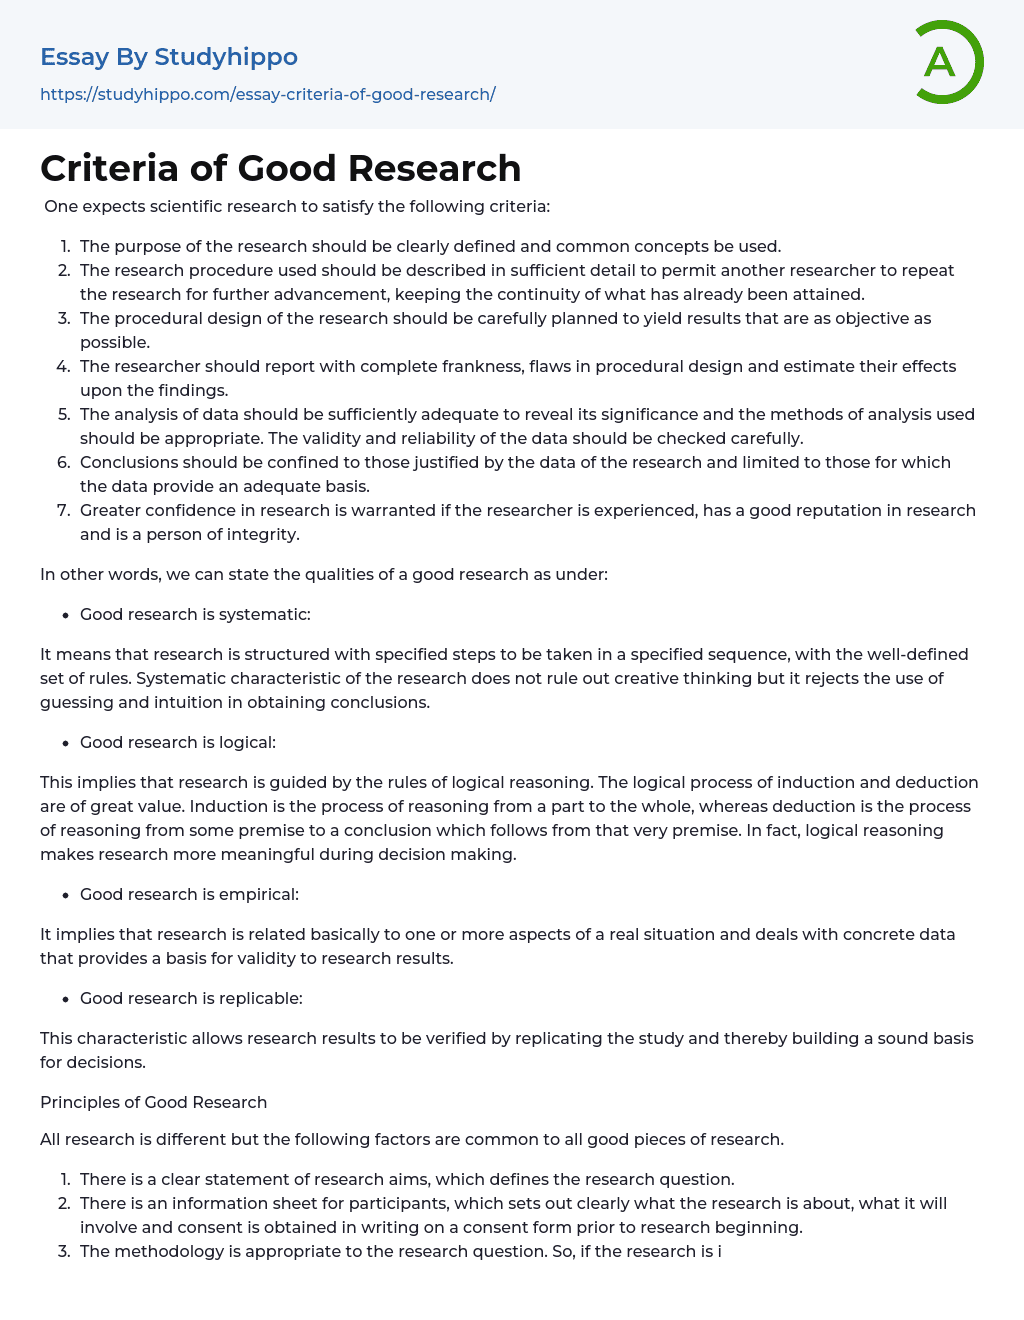 Criteria of Good Research Essay Example